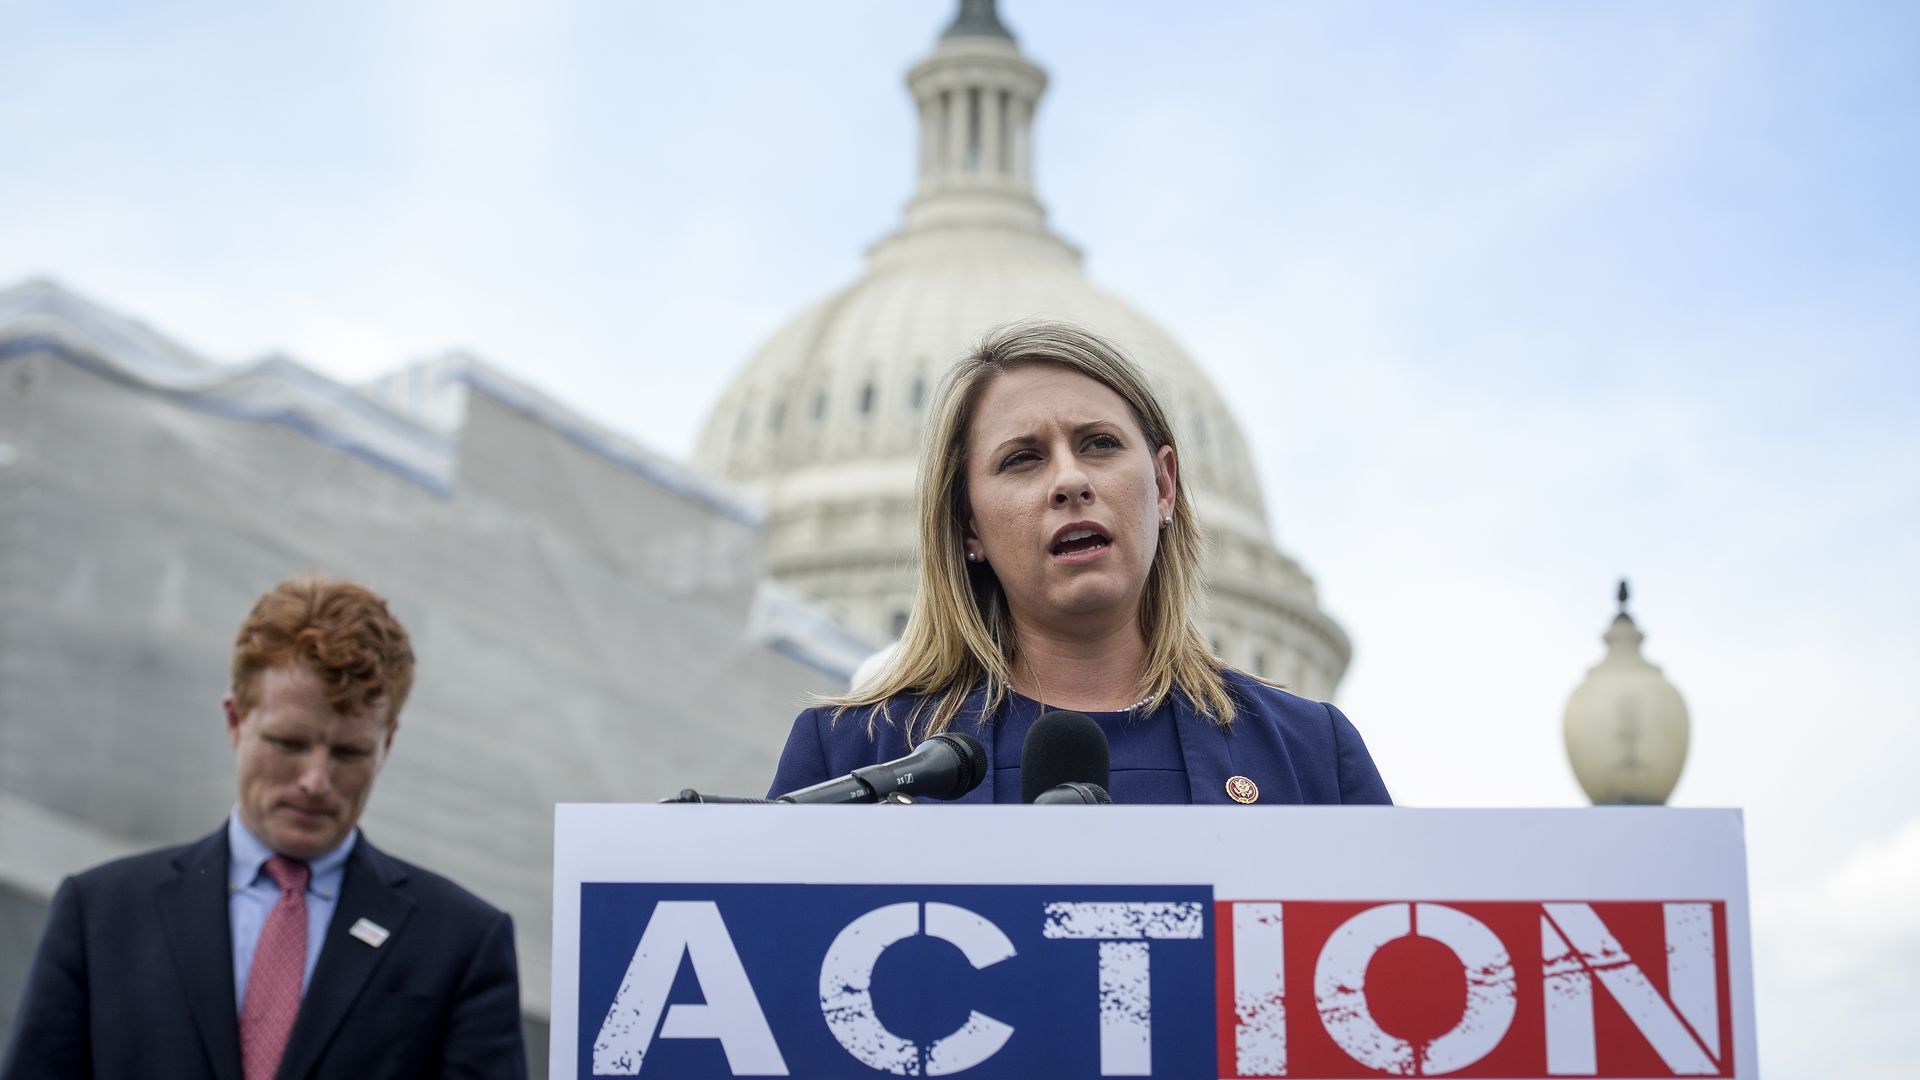 Photo of Katie Hill speaking from behind a podium against the backdrop of the White House